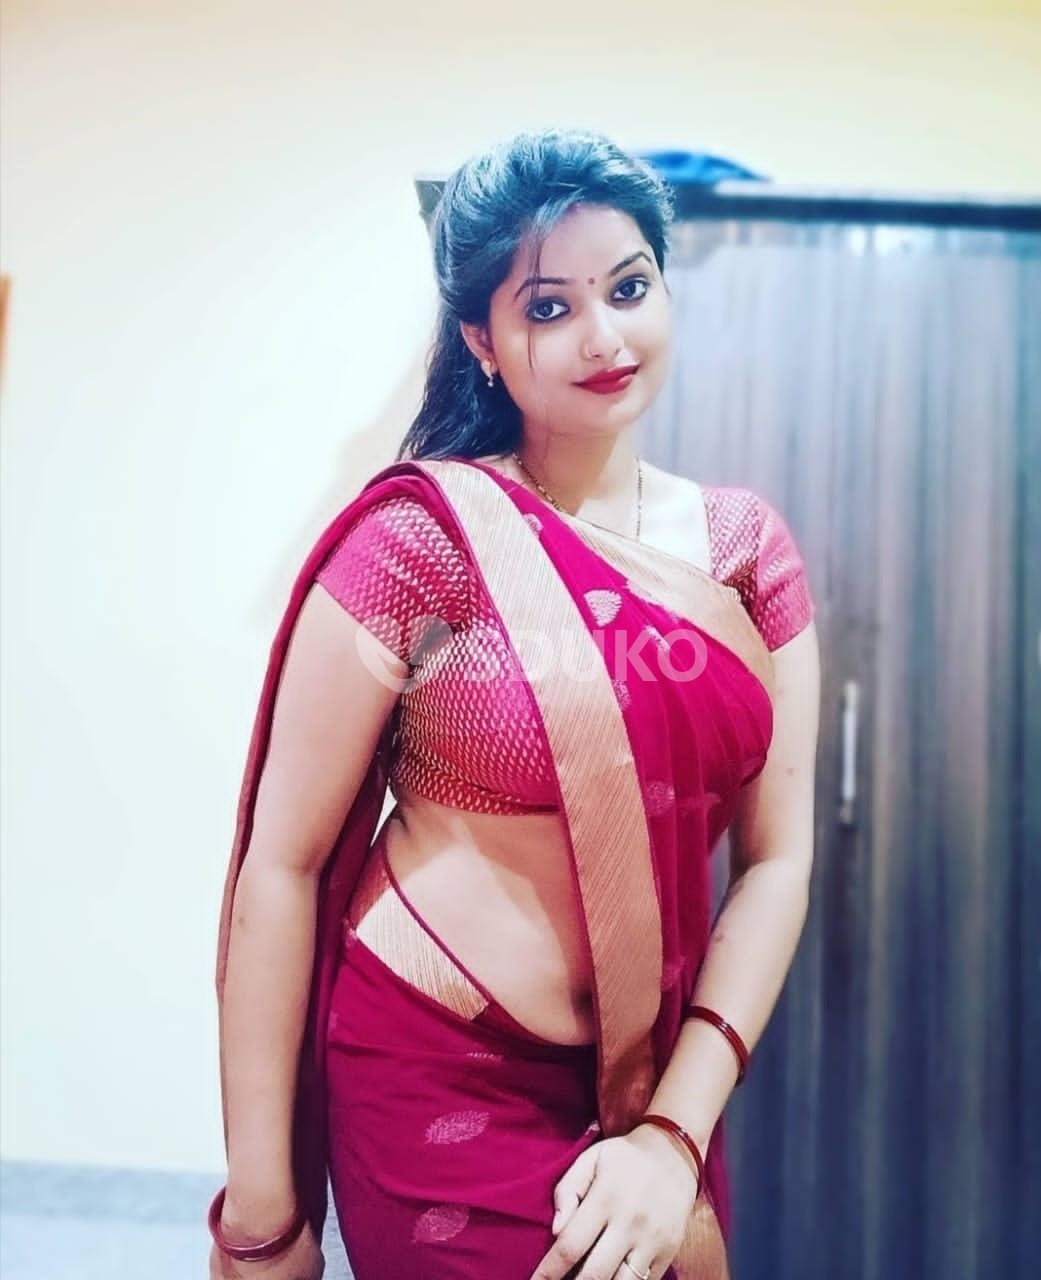 TEZPUR BEST CALL GIRL ESCORTS SERVICE IN/OUT VIP INDEPENDENT CALL GIRLS SERVICE ALL SEX ALLOW BOOKING CONFIRMATION Whats